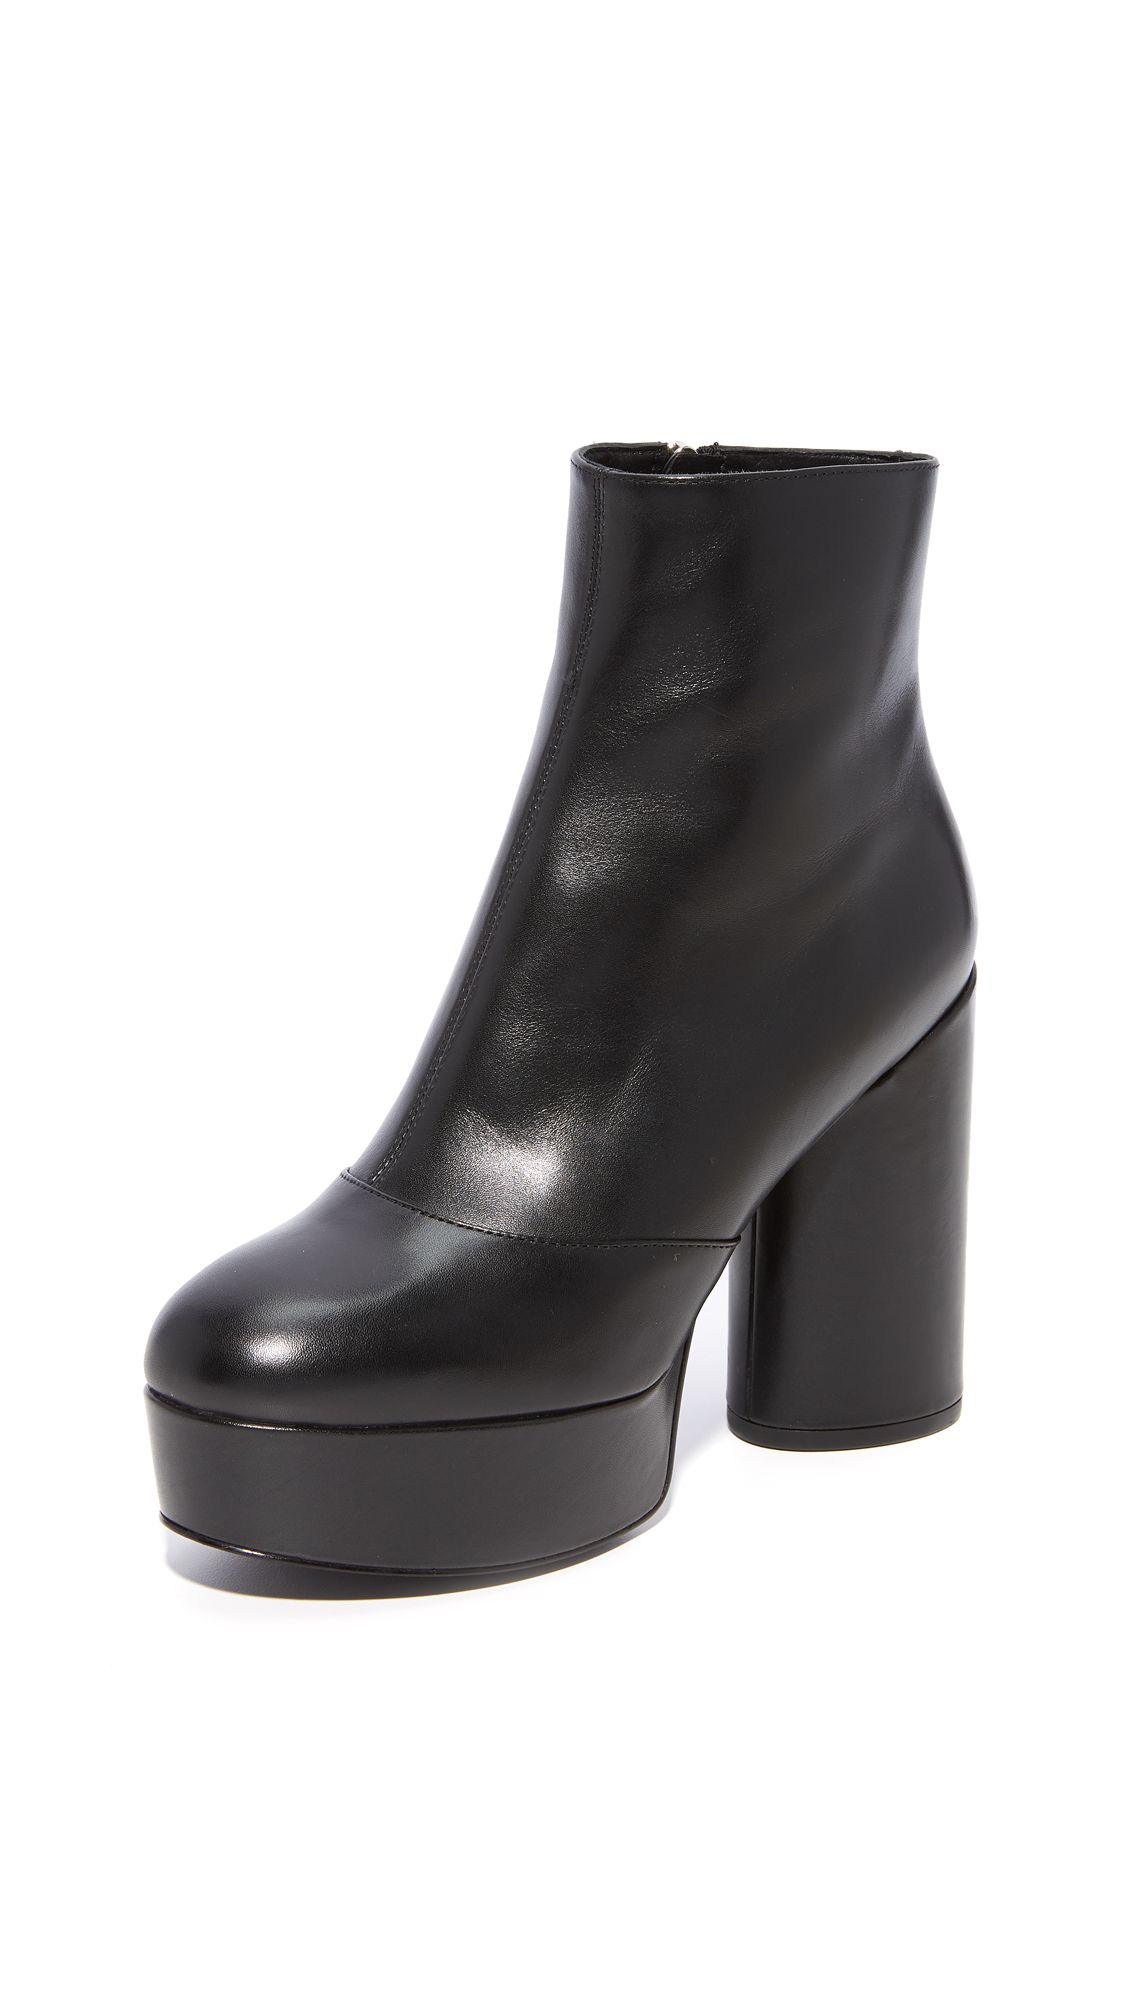 Marc Jacobs Amber Platform Ankle Booties | Shopbop